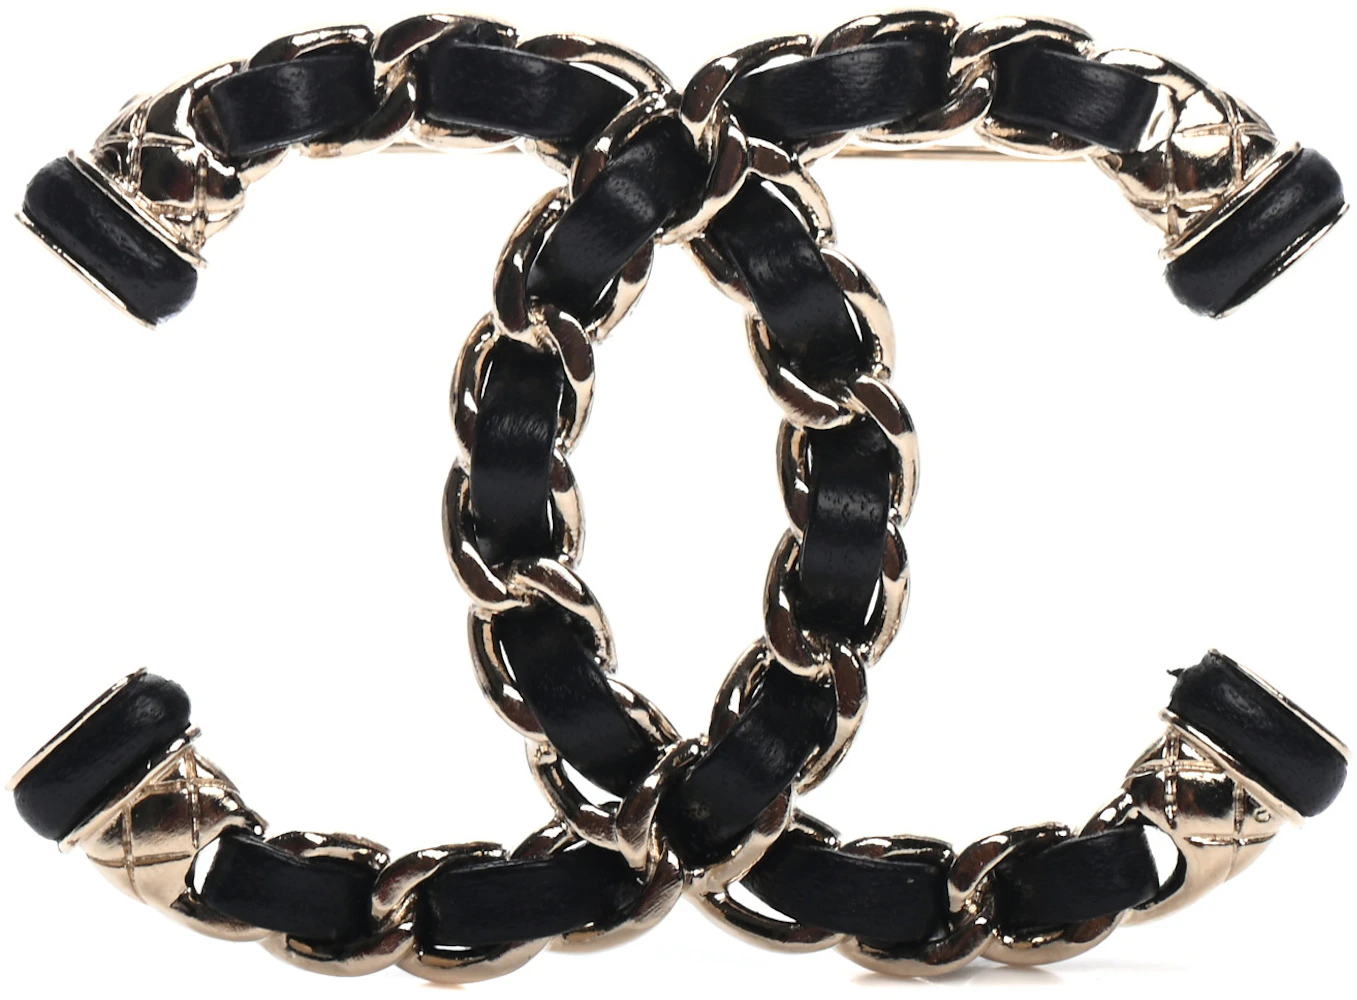 Chanel CC Braided Leather Black Brooch Gold Tone – Coco Approved Studio